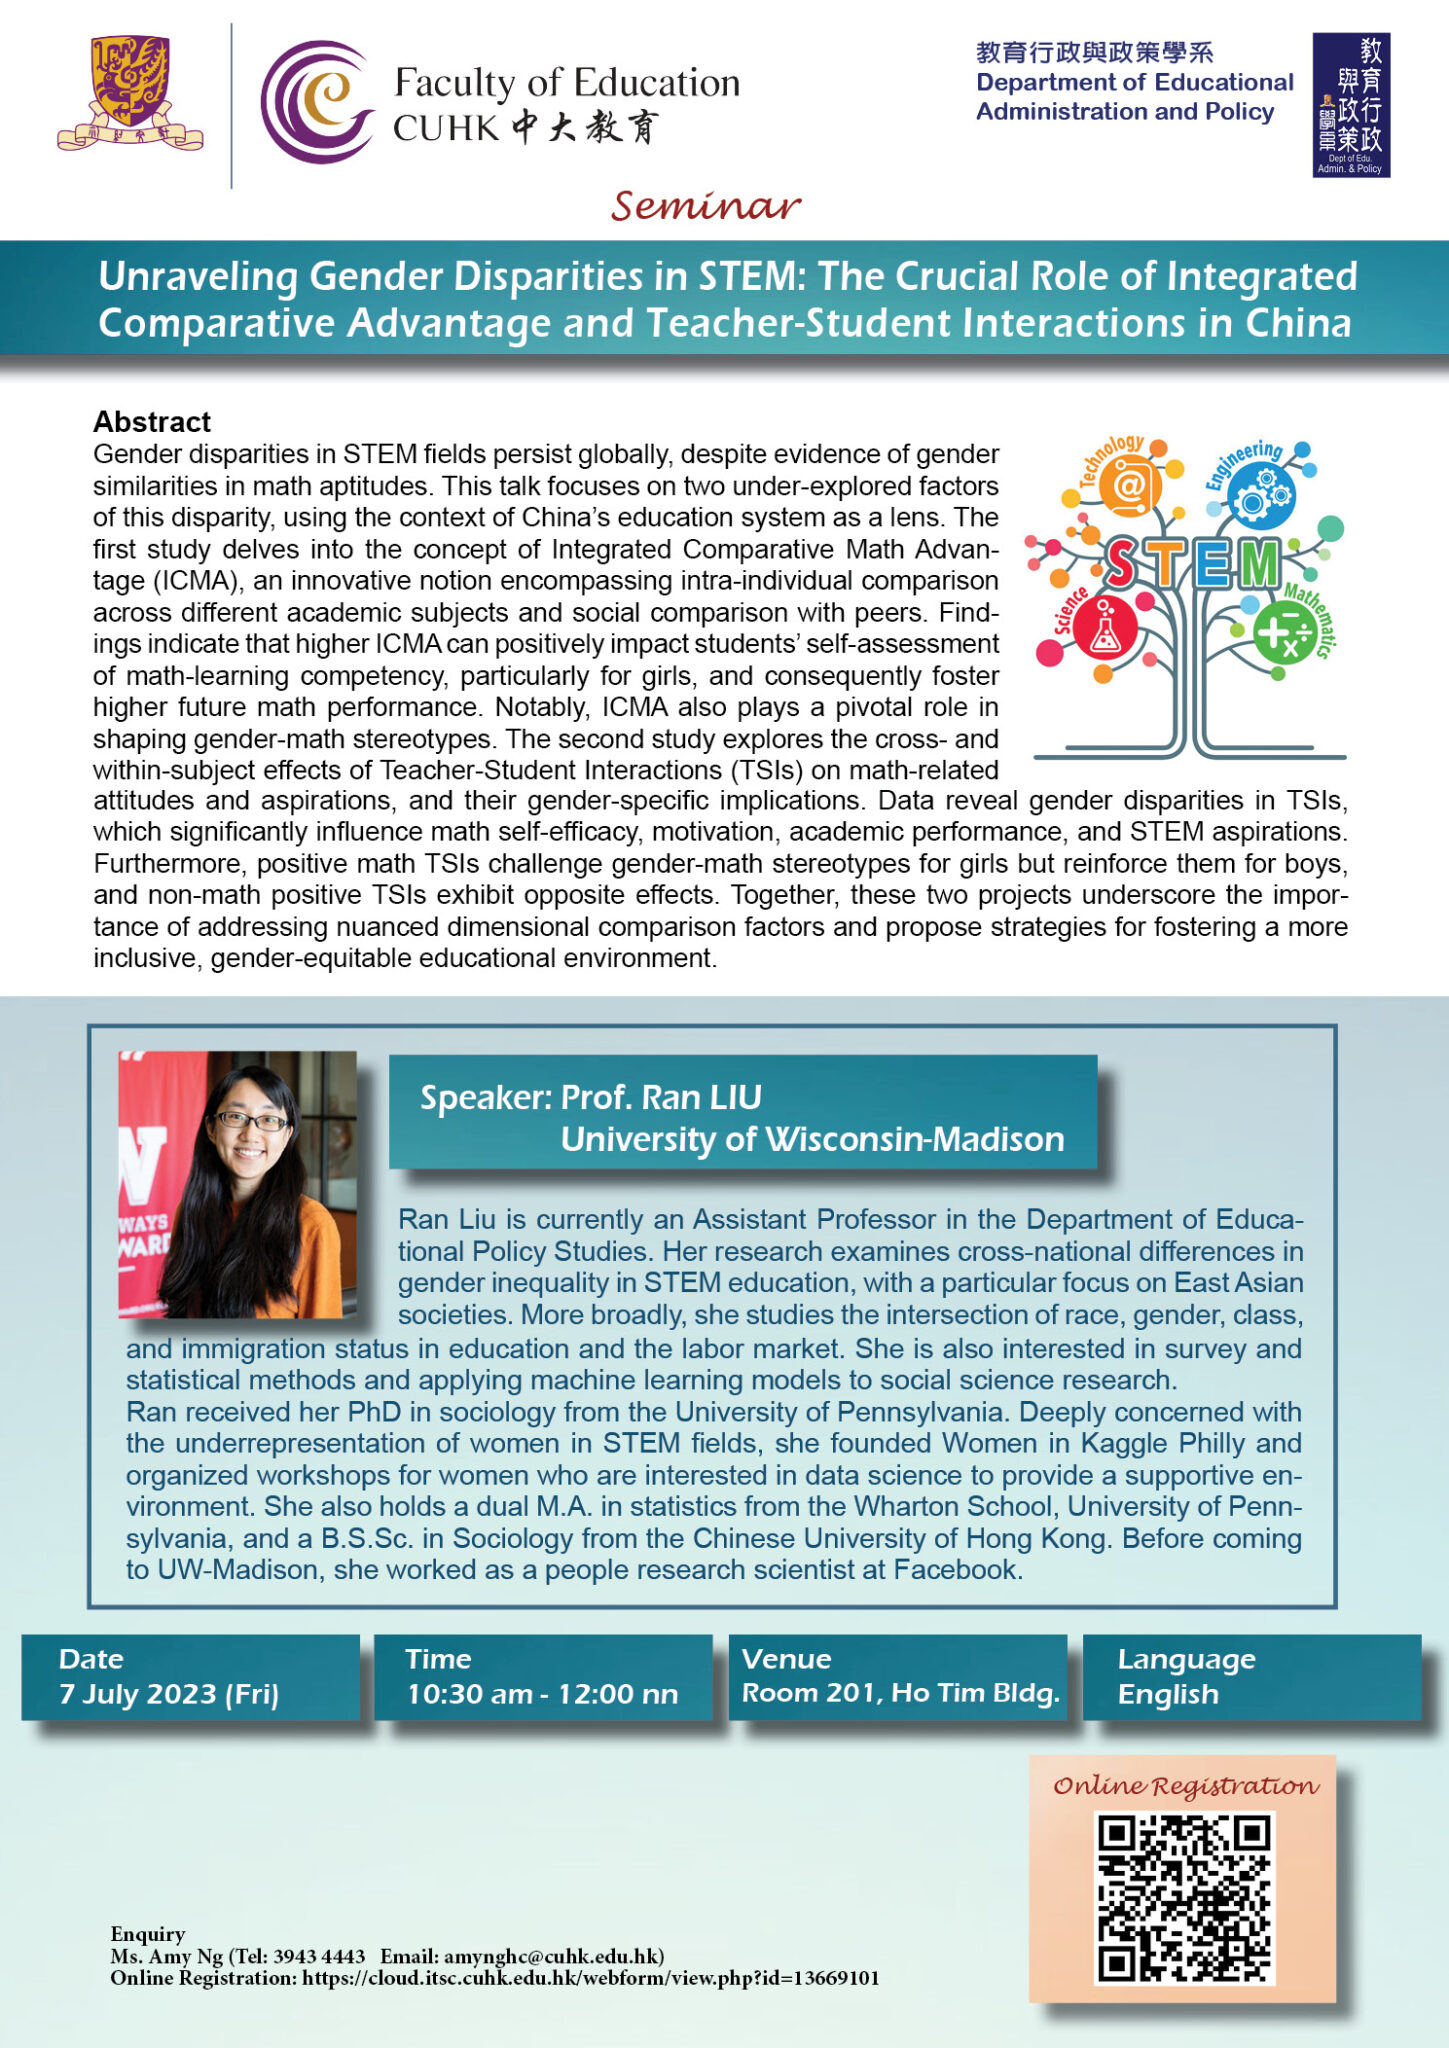 Unraveling Gender Disparities in STEM: The Crucial Role of Integrated Comparative Advantage and Teacher-Student Interactions in China